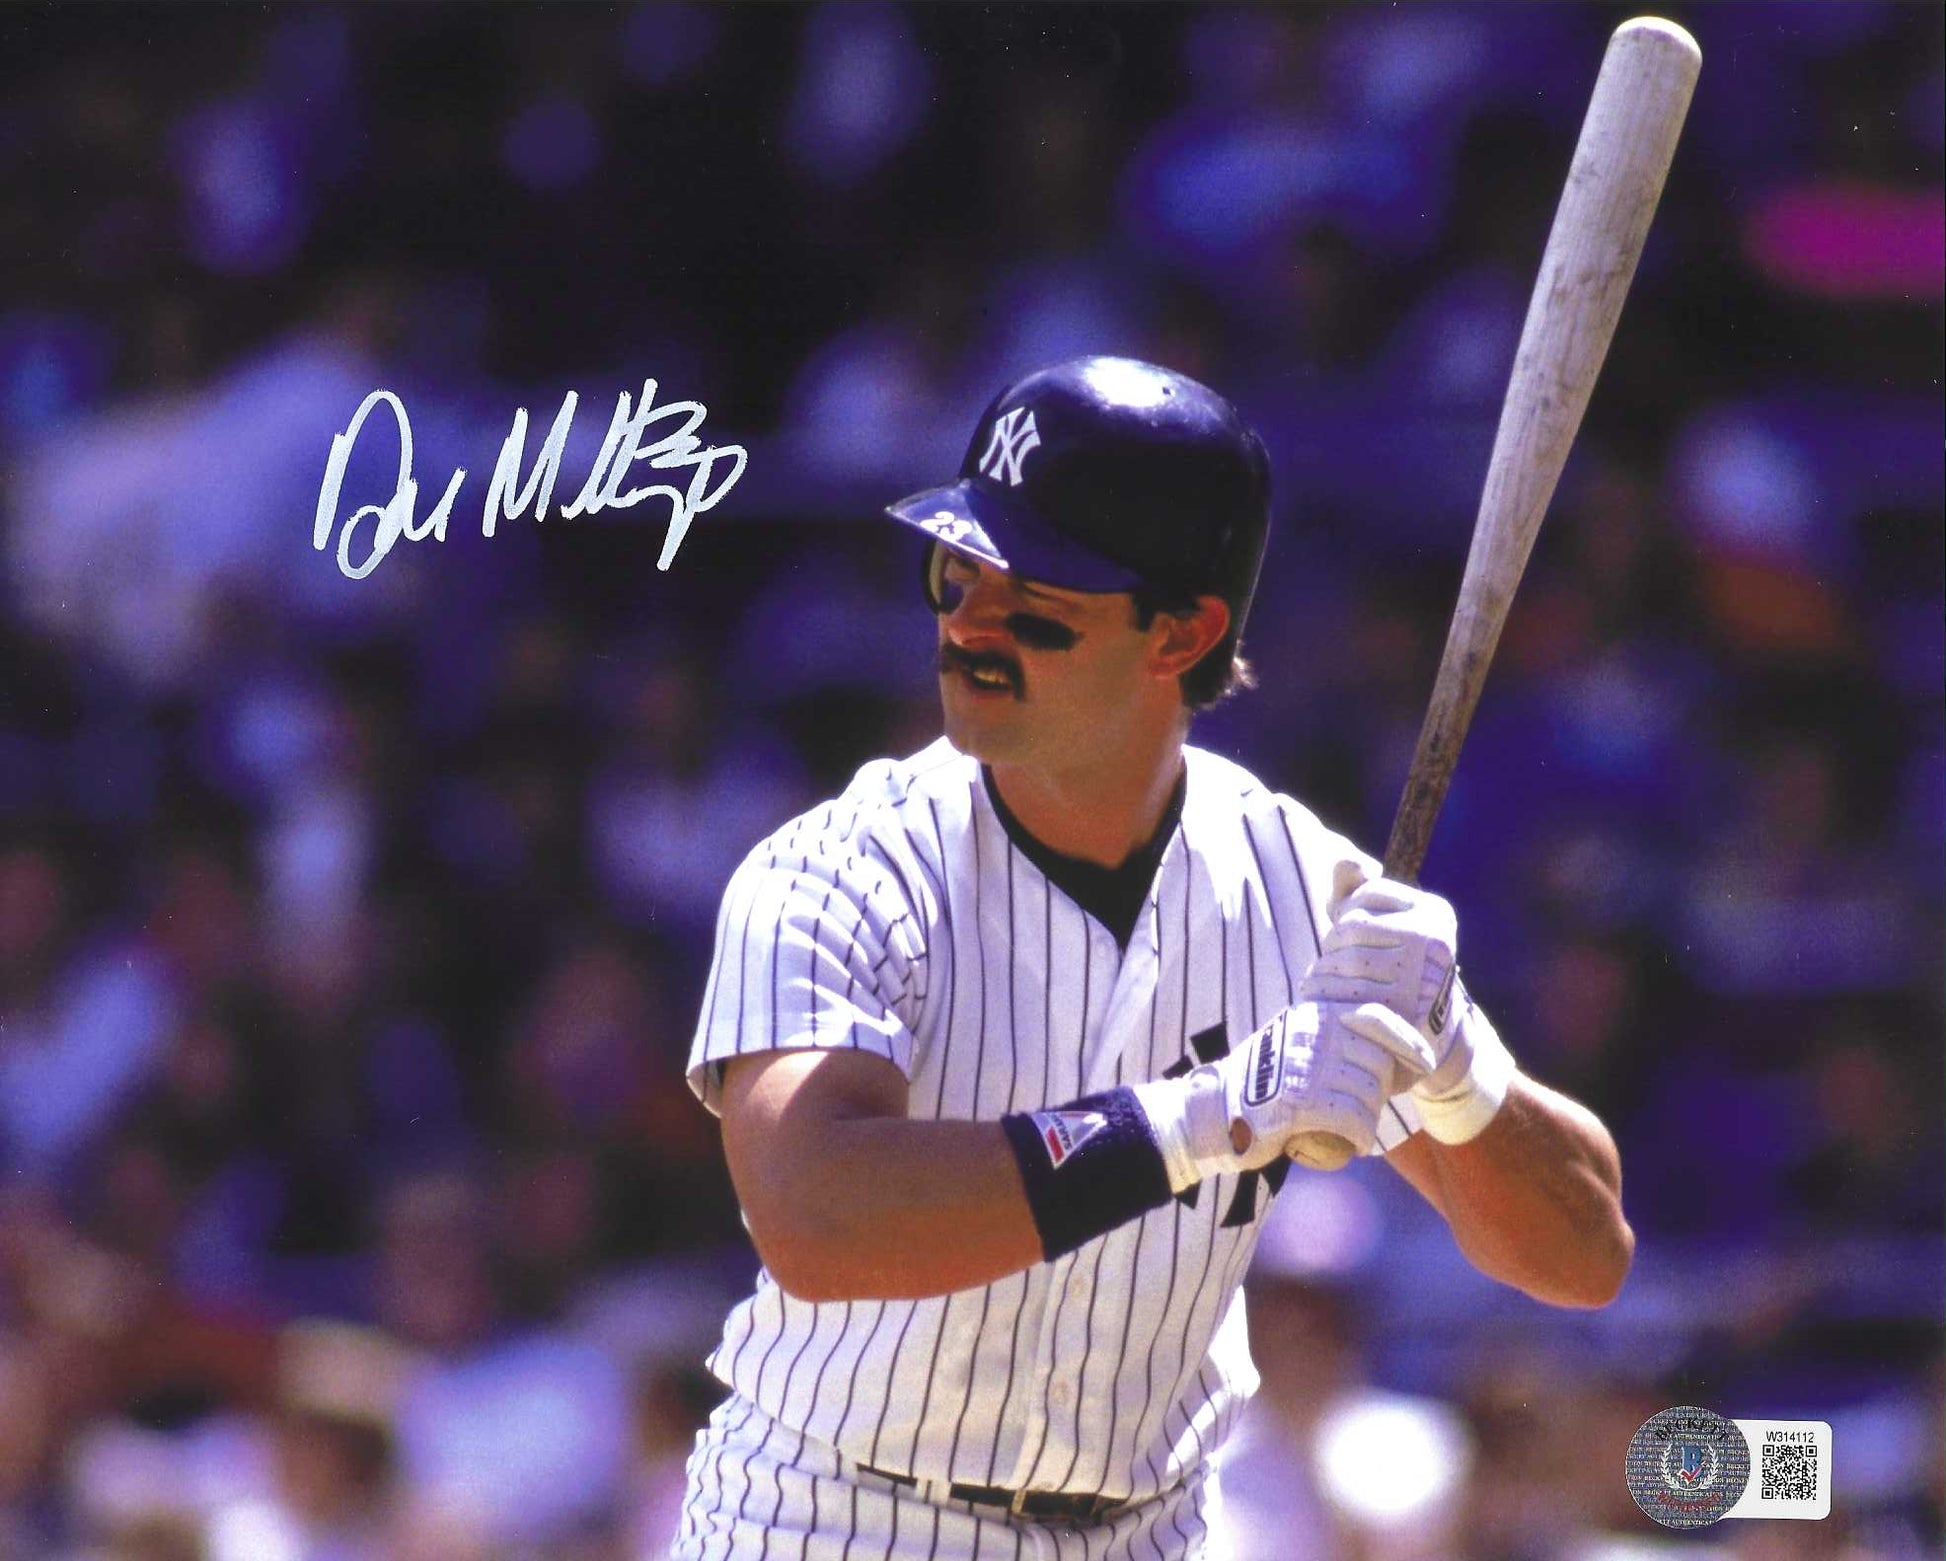 New York Yankees Don Mattingly "Donnie Baseball" Autographed 8x10 Photo Picture Becketts Certified